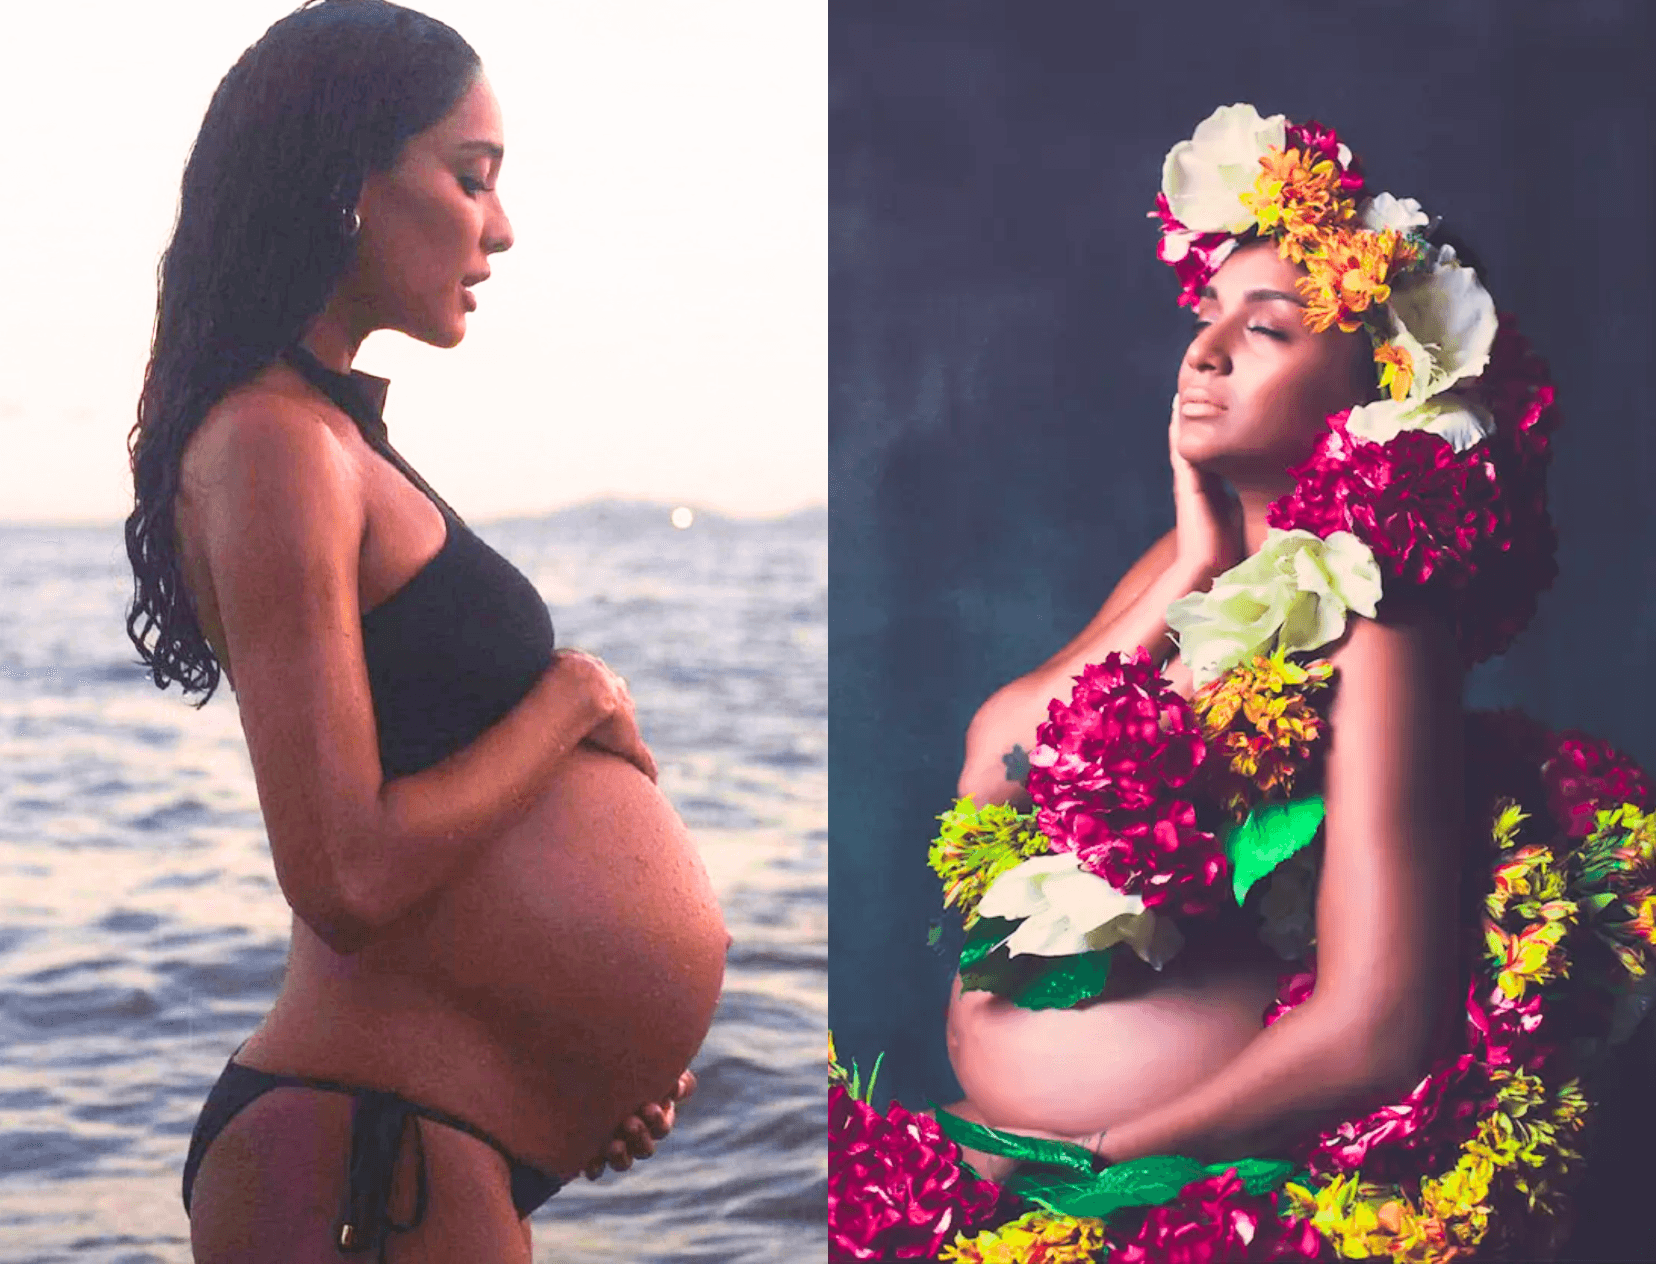 6 Celebs Who Flaunted Their Bare Bumps In Maternity Photoshoots